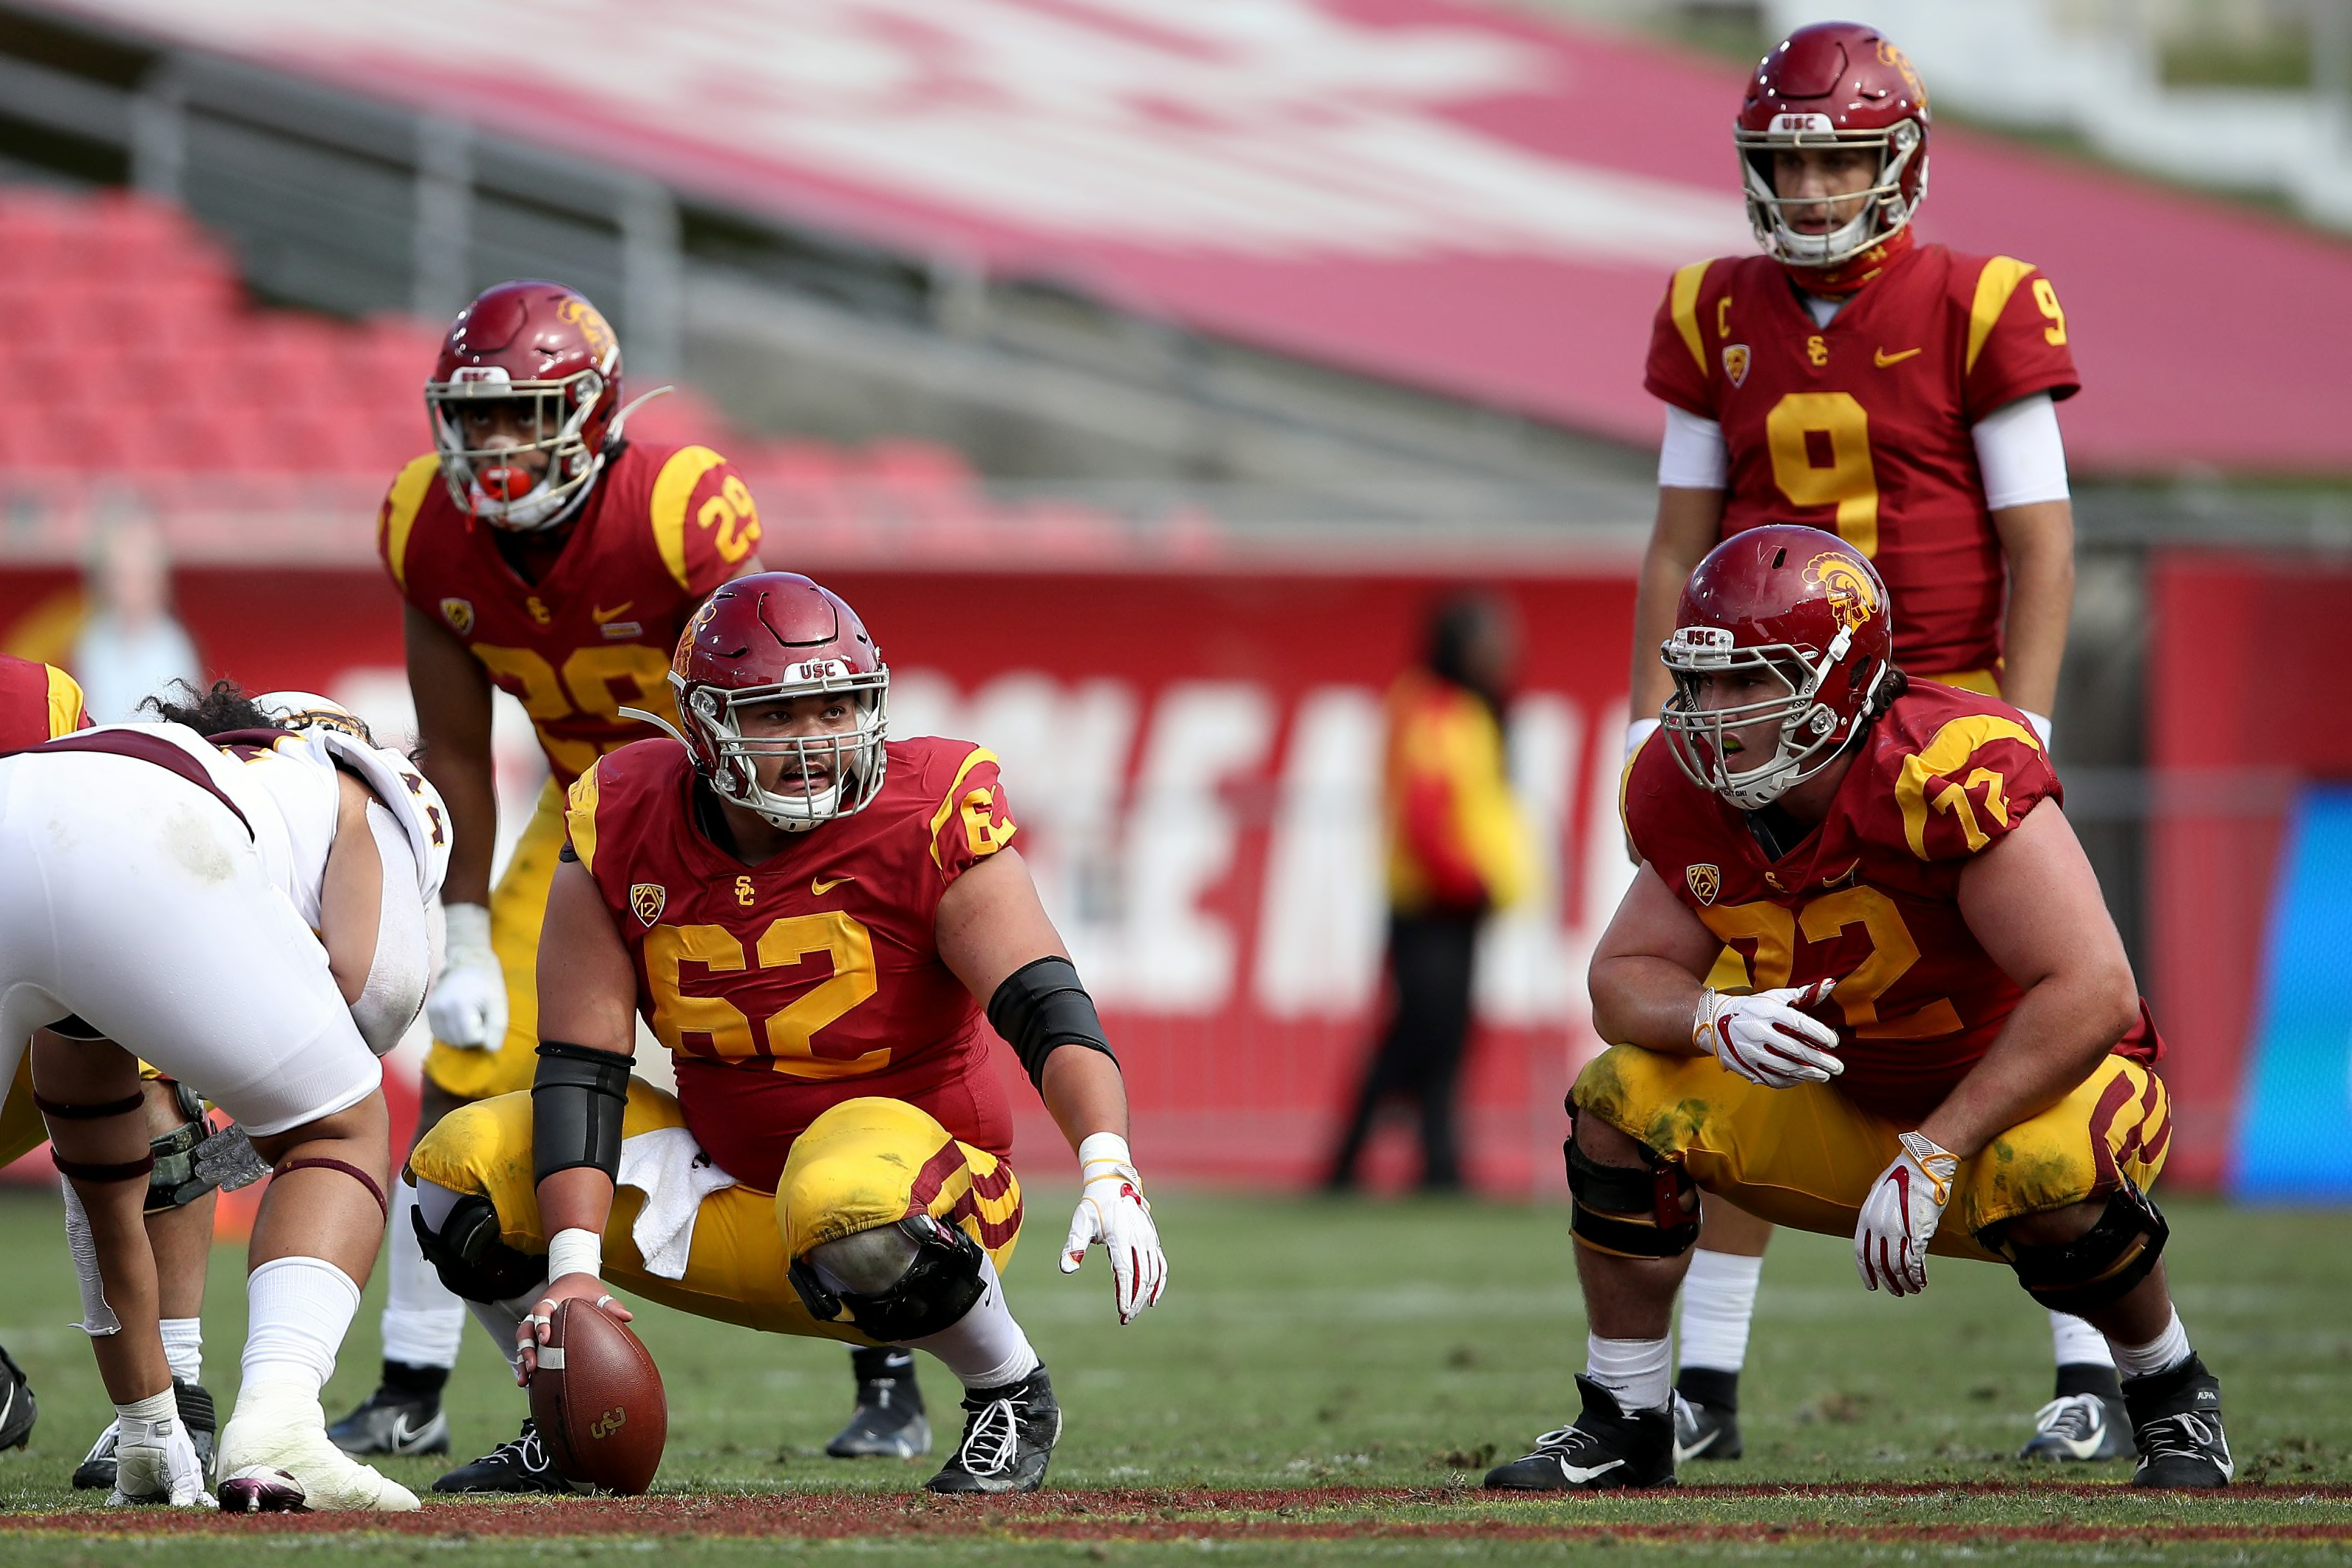 USC Football: Way-too-early 2022 depth chart projection - Page 6